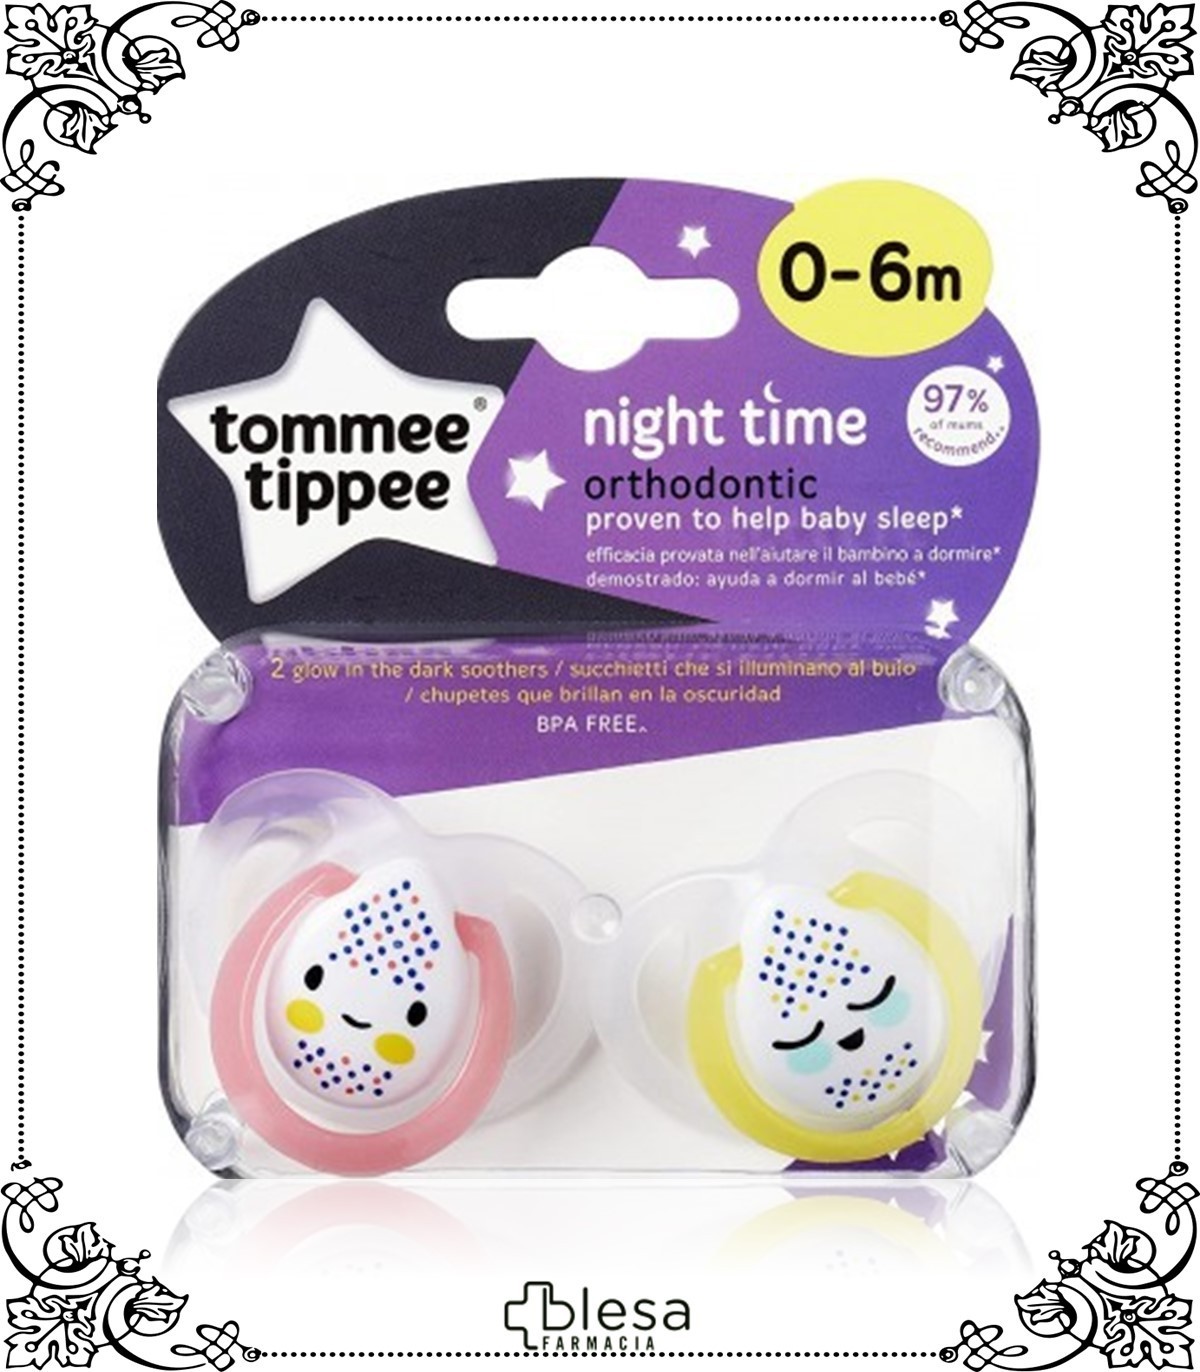 Chupetes de Tommee Tippee 